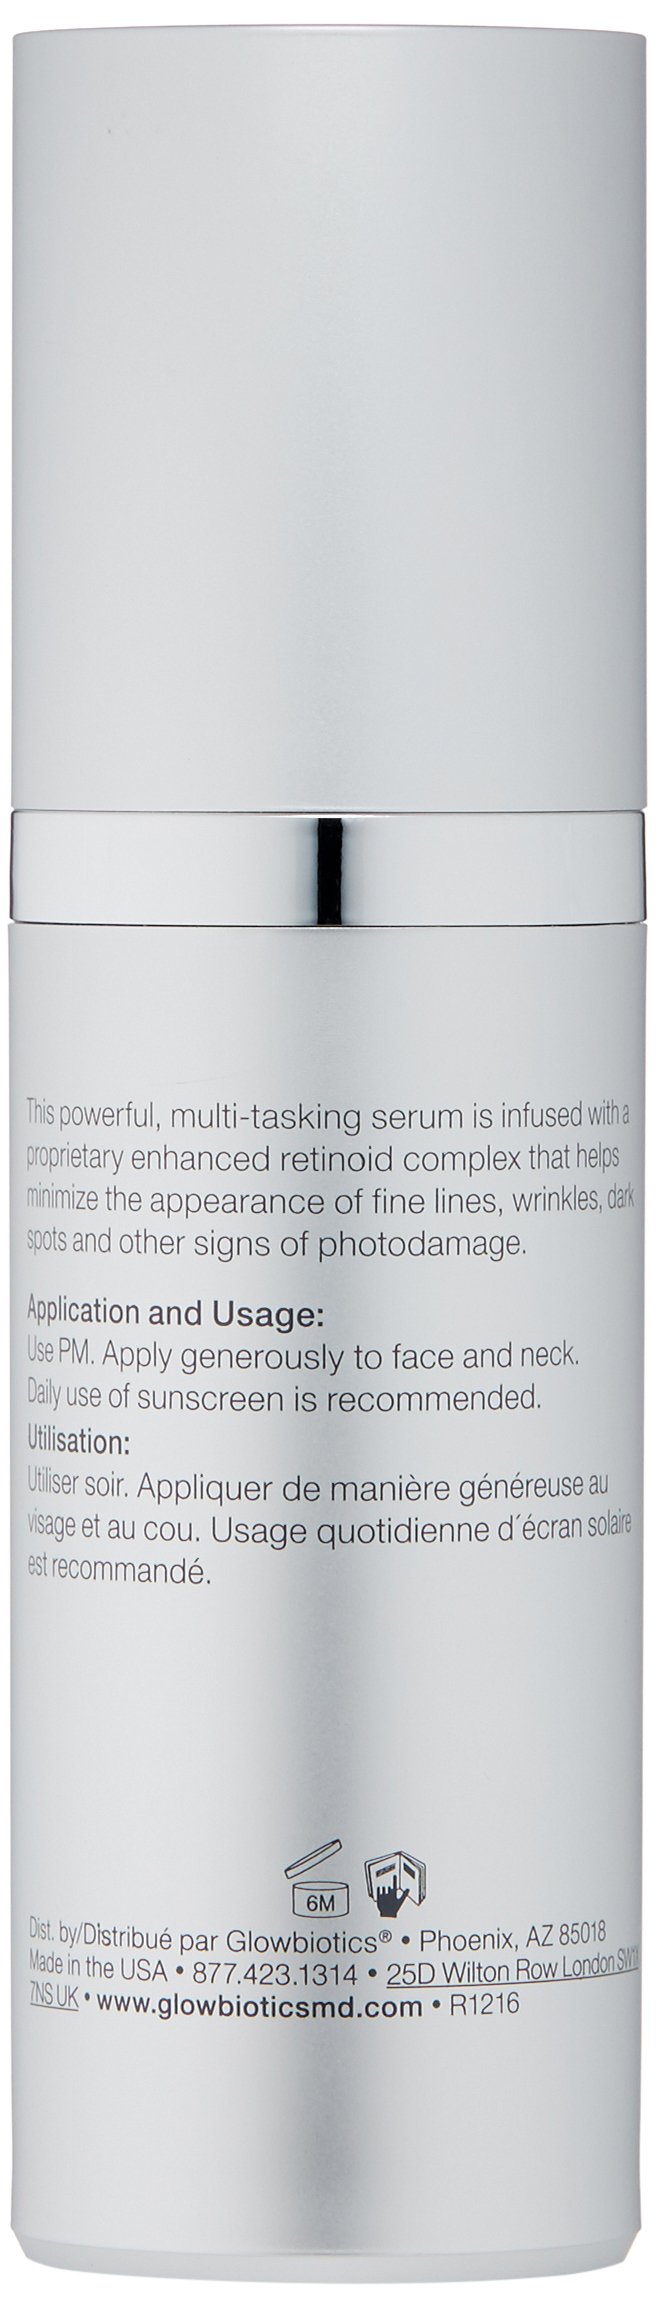 GLOWBIOTICS MD - Probiotic Ultimate Youth Restoring Serum Firm and Tighten Aging Skin - For Dry and Normal Skin Types (1 fl oz) - Made in the USA